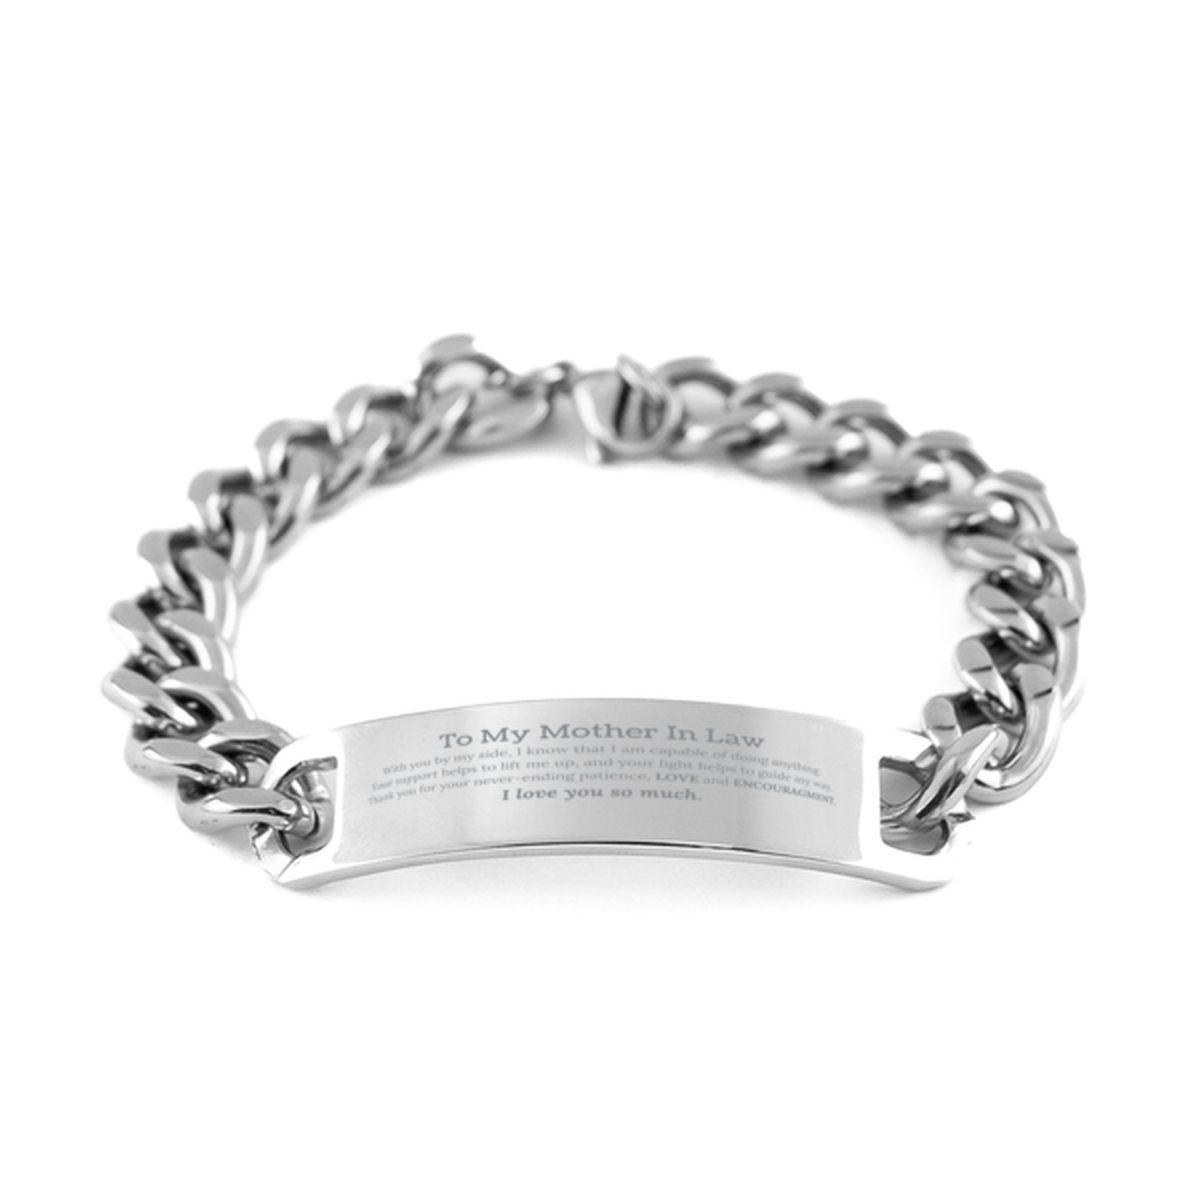 Appreciation Mother In Law Cuban Chain Stainless Steel Bracelet Gifts, To My Mother In Law Birthday Christmas Wedding Keepsake Gifts for Mother In Law With you by my side, I know that I am capable of doing anything. I love you so much